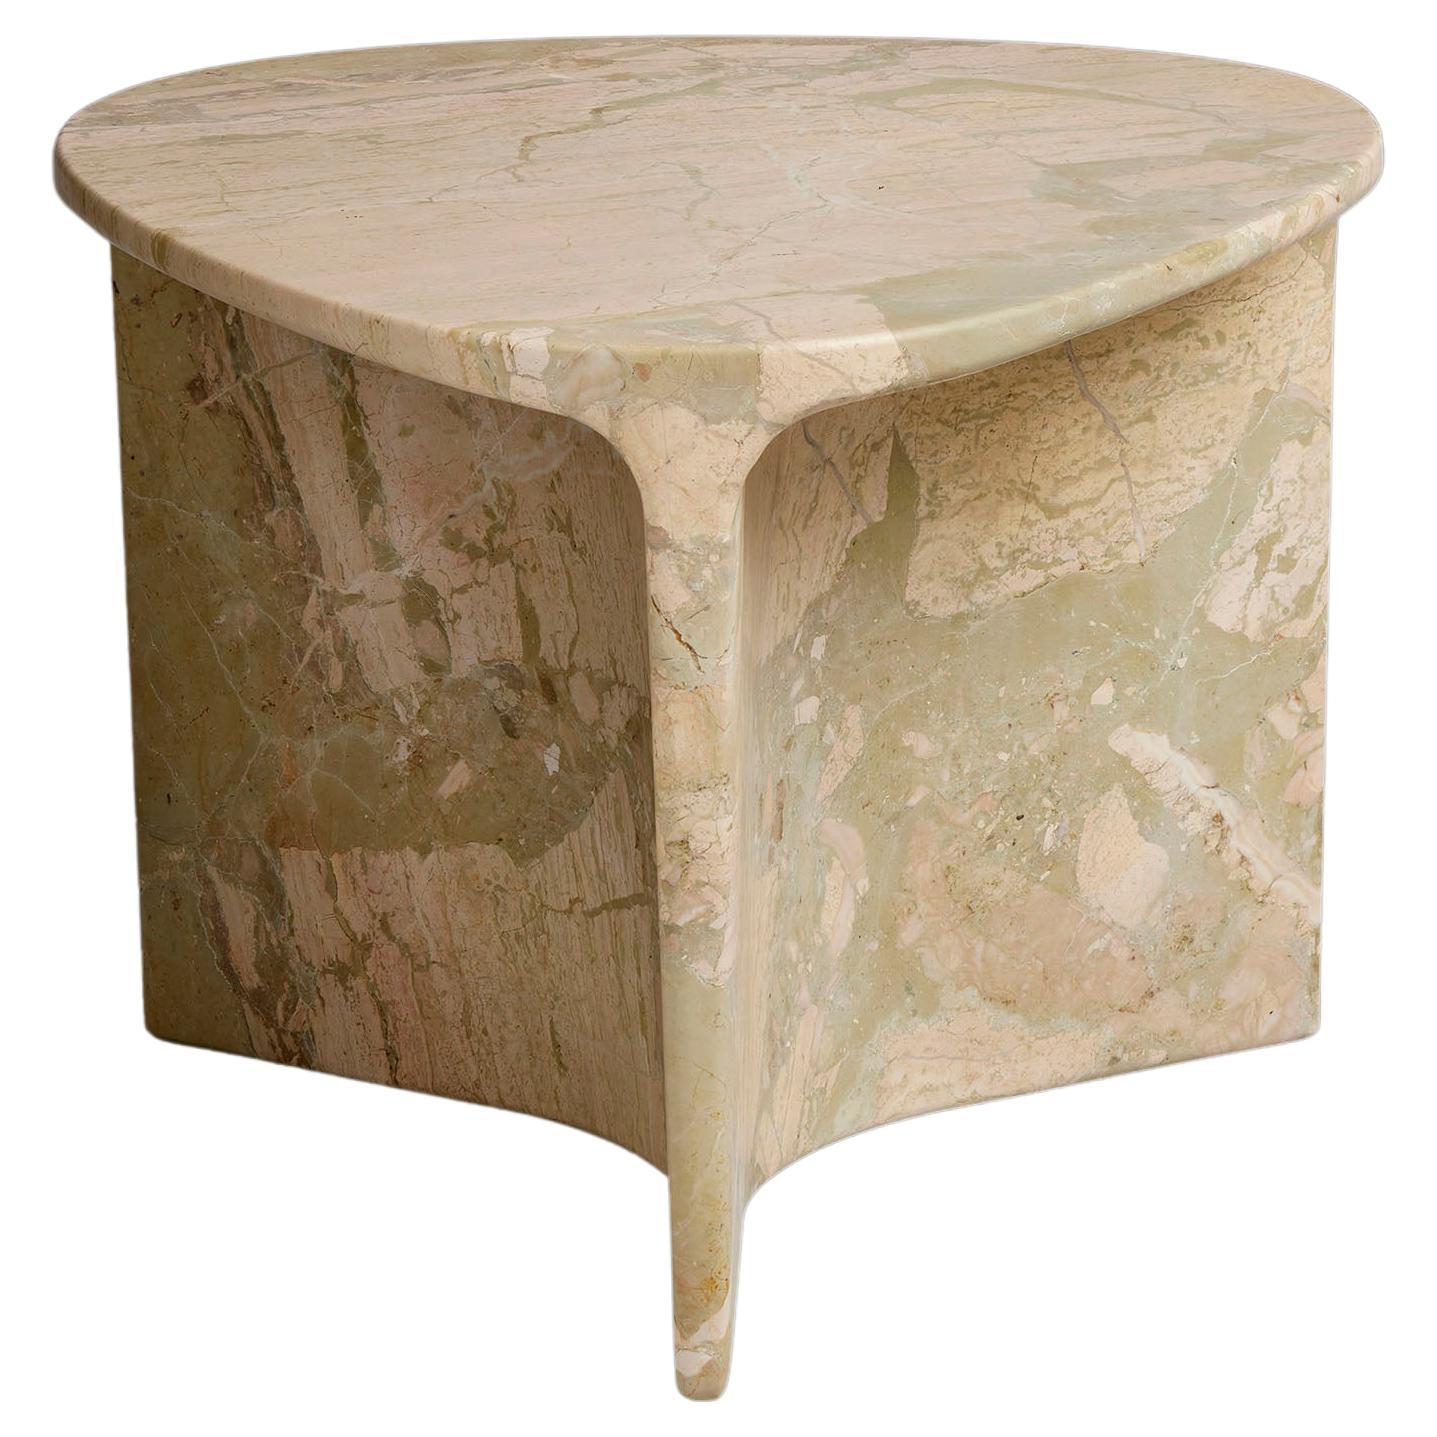 Carv Occasional Table in Ceppo Monet marble by Daniel Fintzi for Formar